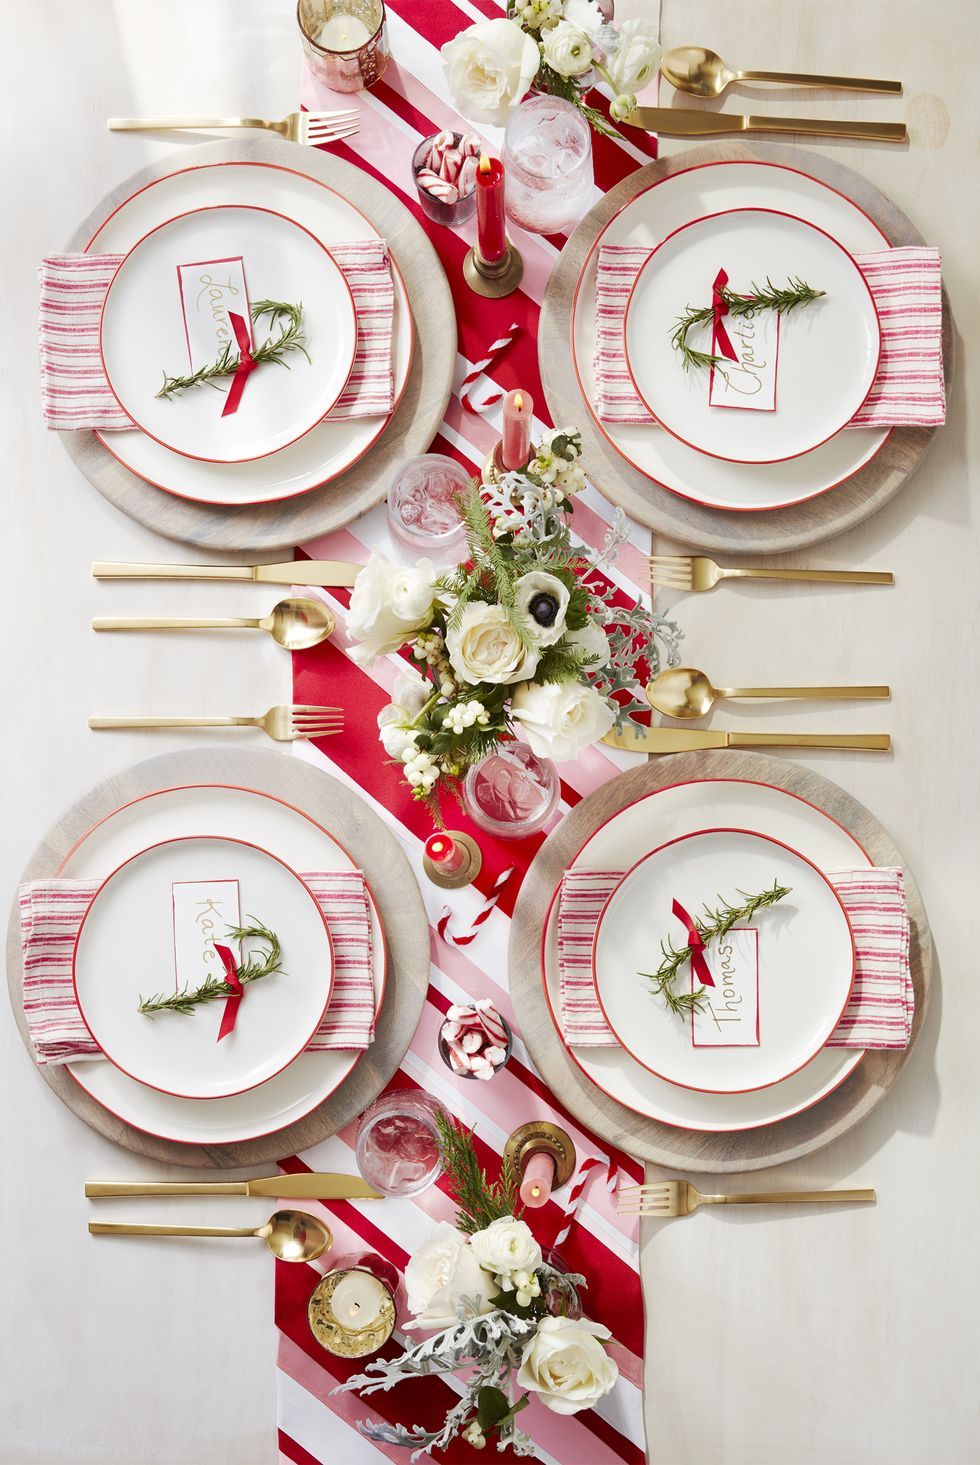 18 DIY Christmas Table Settings and Decorations   Centerpieces ...